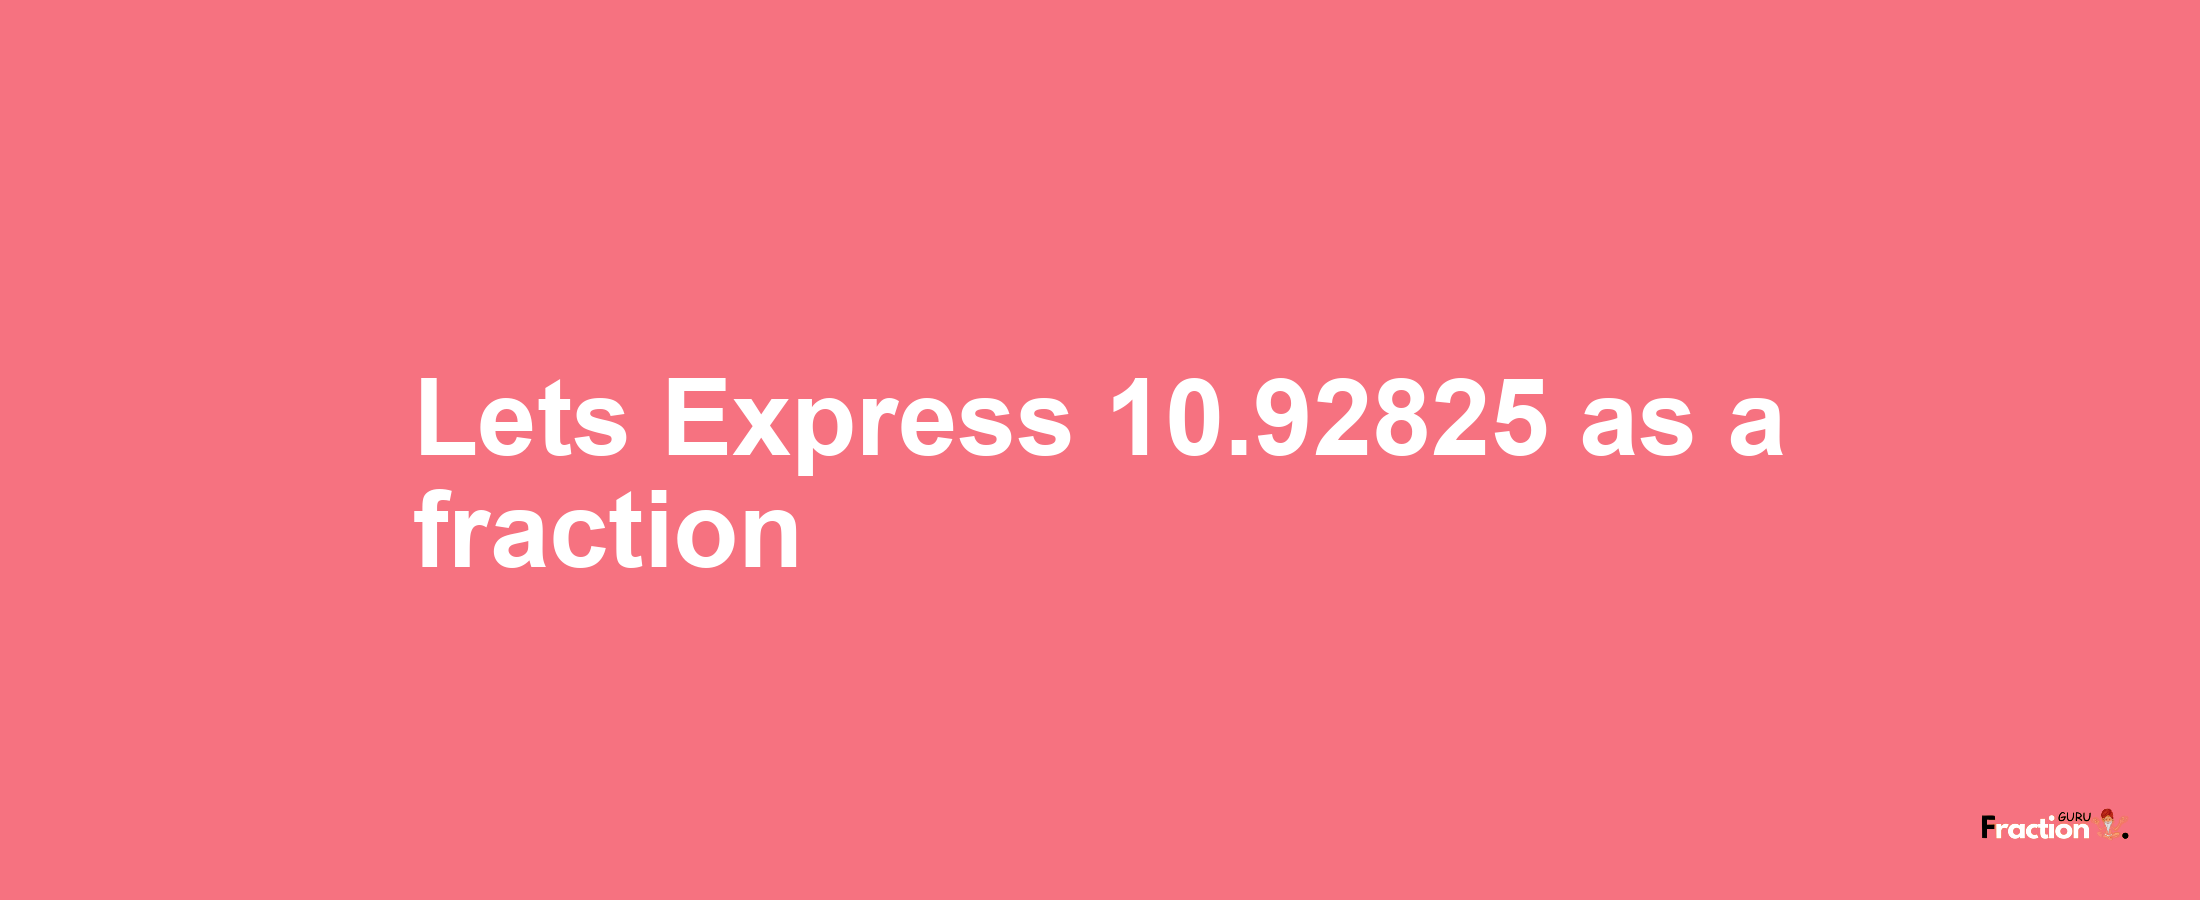 Lets Express 10.92825 as afraction